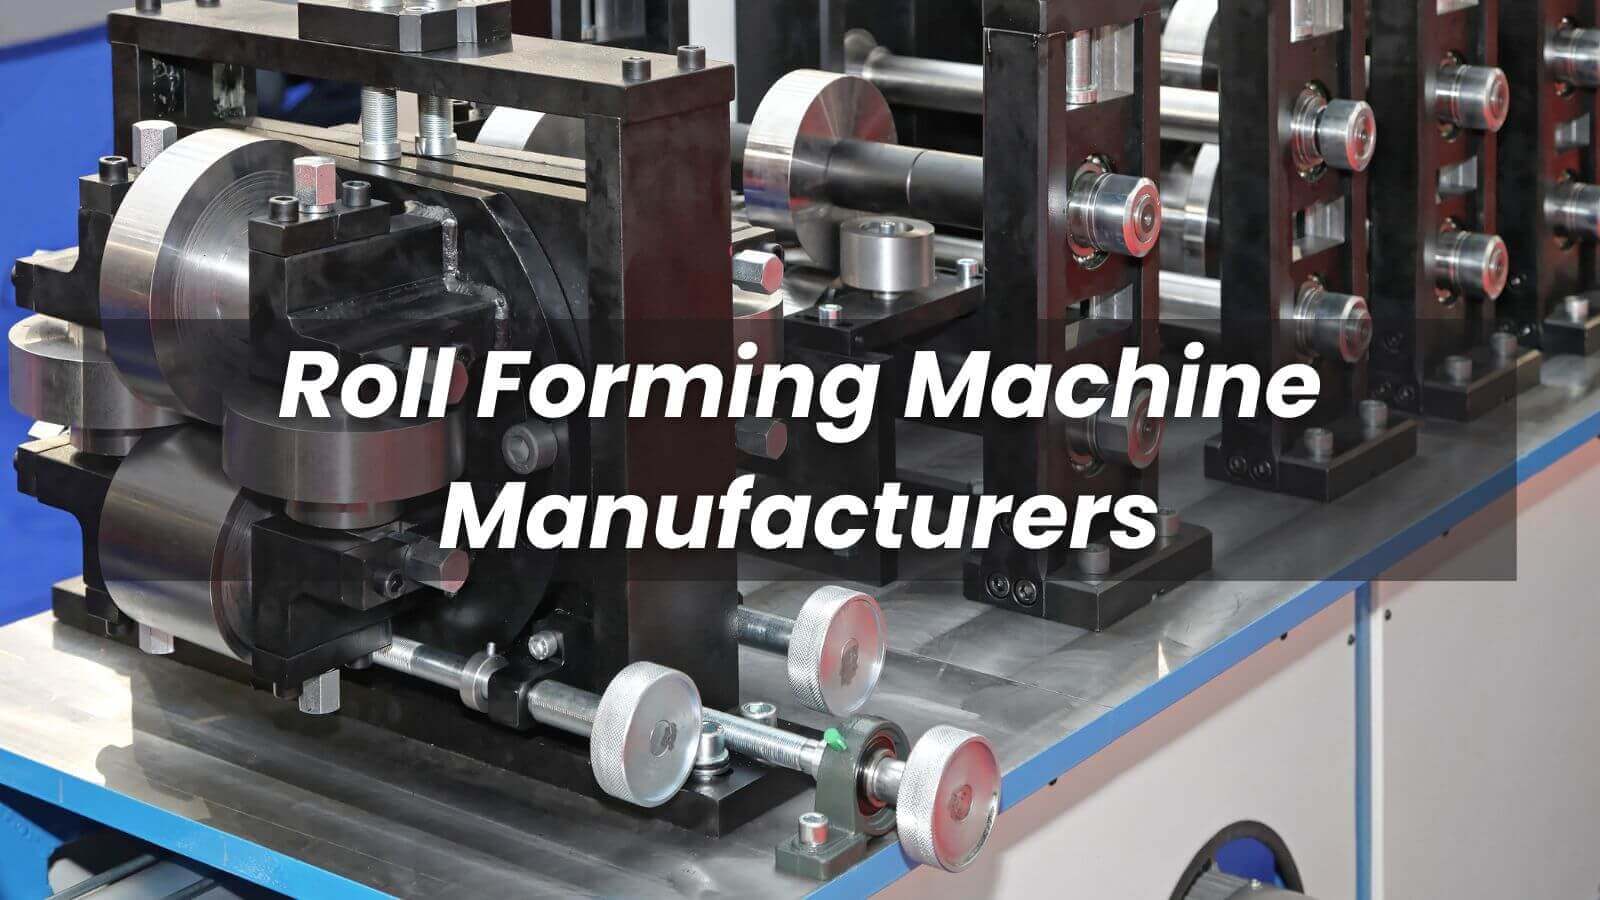 Roll Forming Machine Manufacturers in Australia